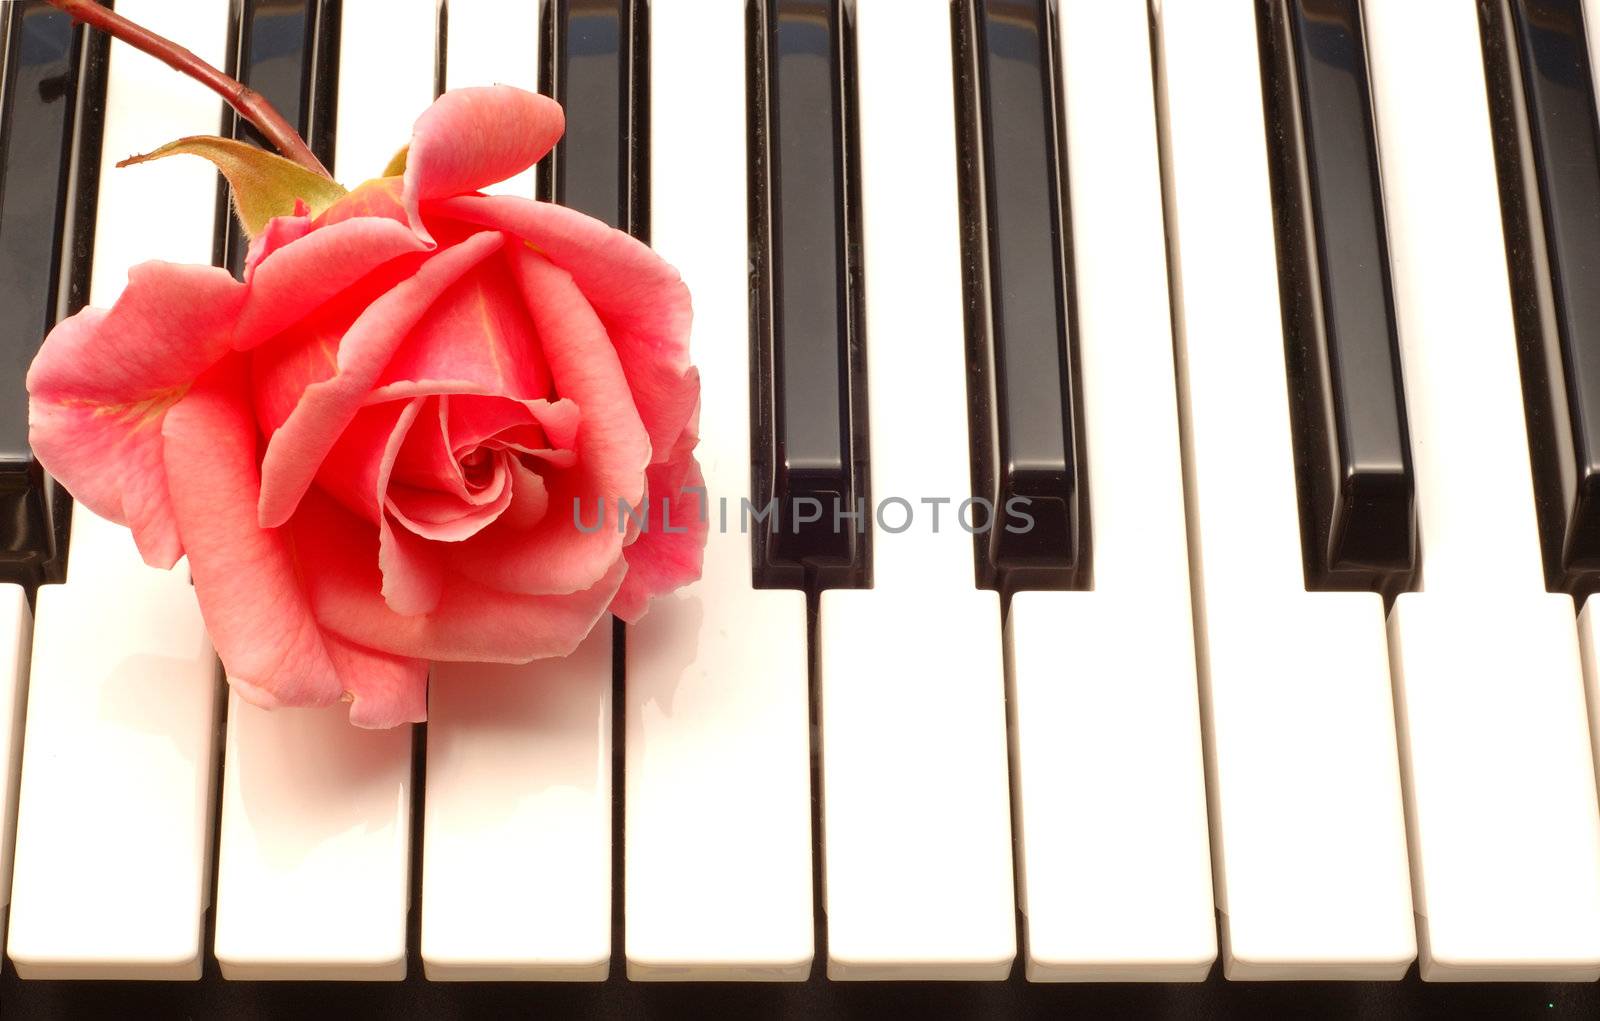 Rose on Piano by sjeacle